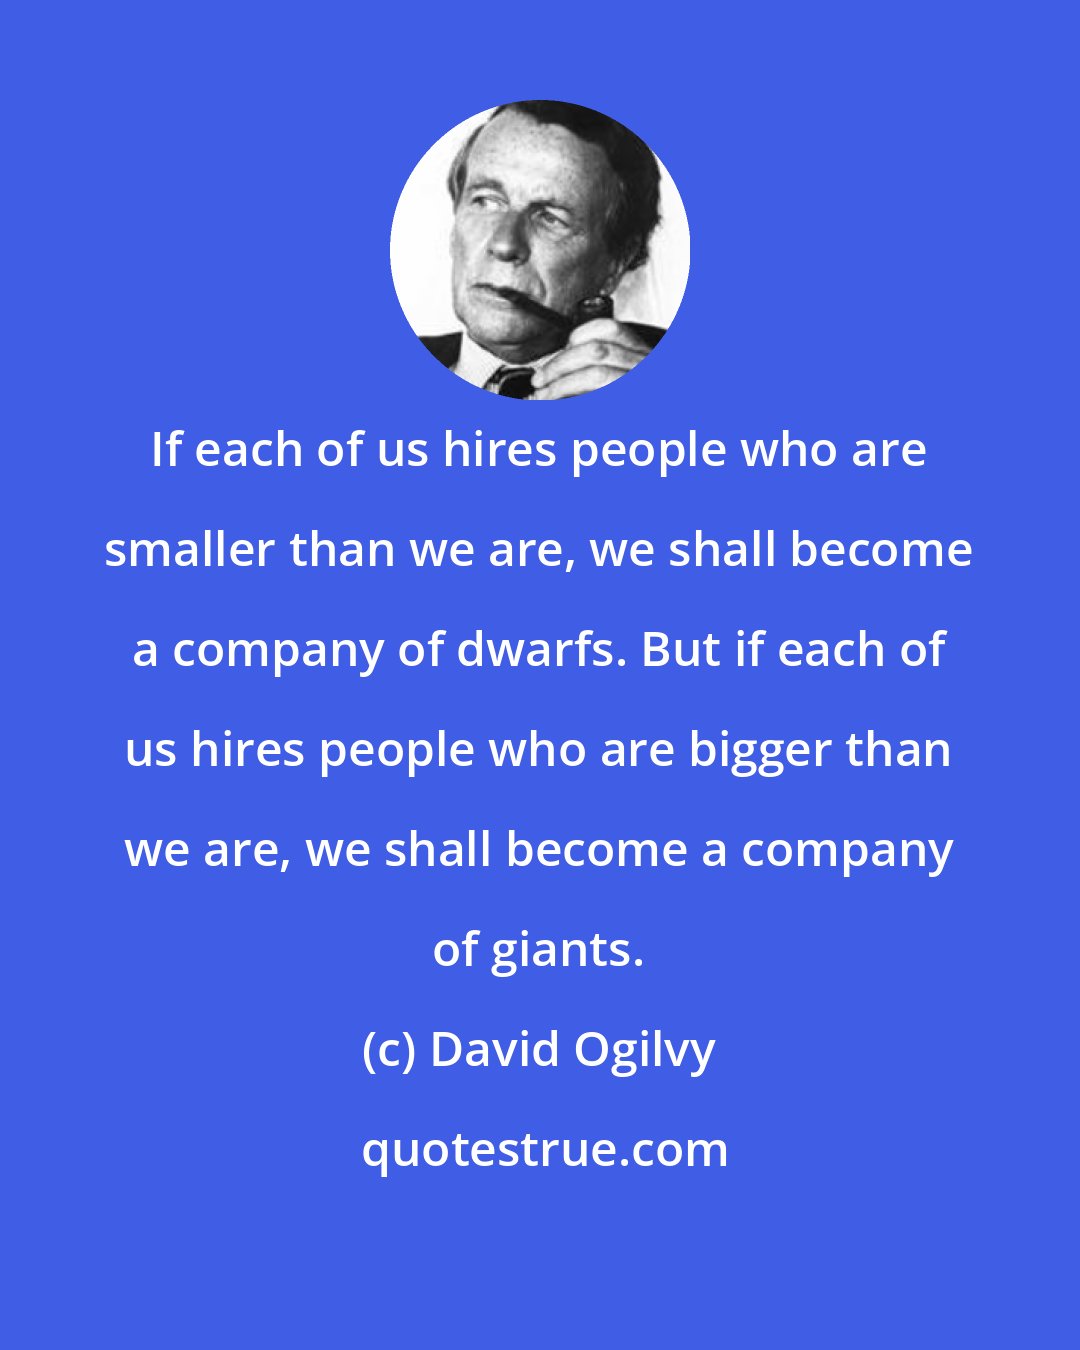 David Ogilvy: If each of us hires people who are smaller than we are, we shall become a company of dwarfs. But if each of us hires people who are bigger than we are, we shall become a company of giants.